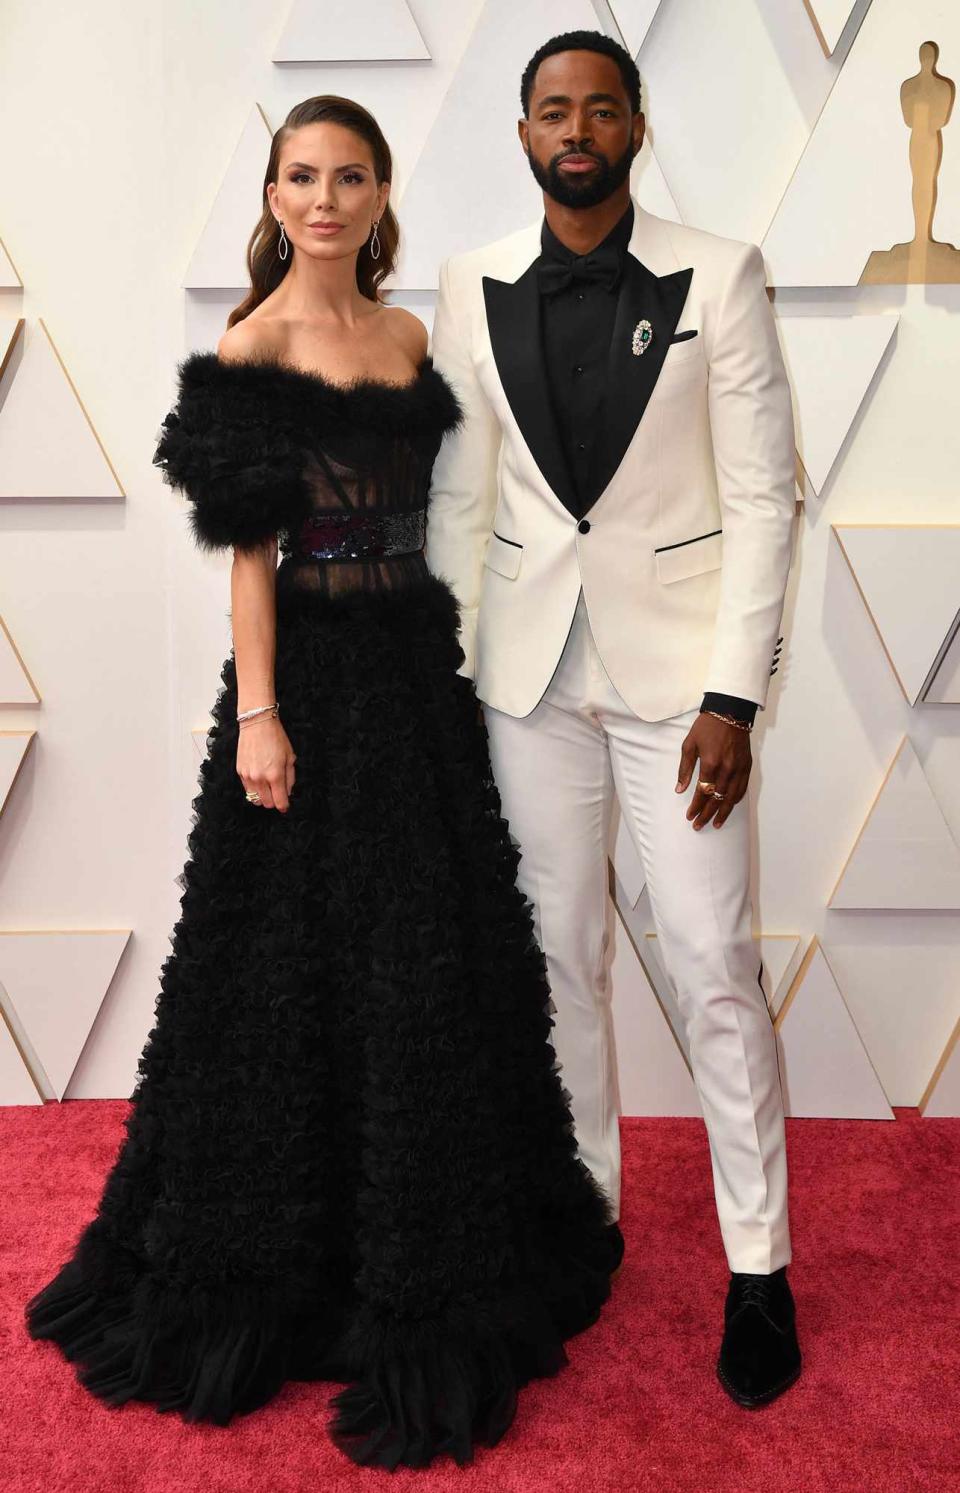 Jay Ellis and Serbian actress Nina Senicar attend the 94th Oscars at the Dolby Theatre in Hollywood, California on March 27, 2022